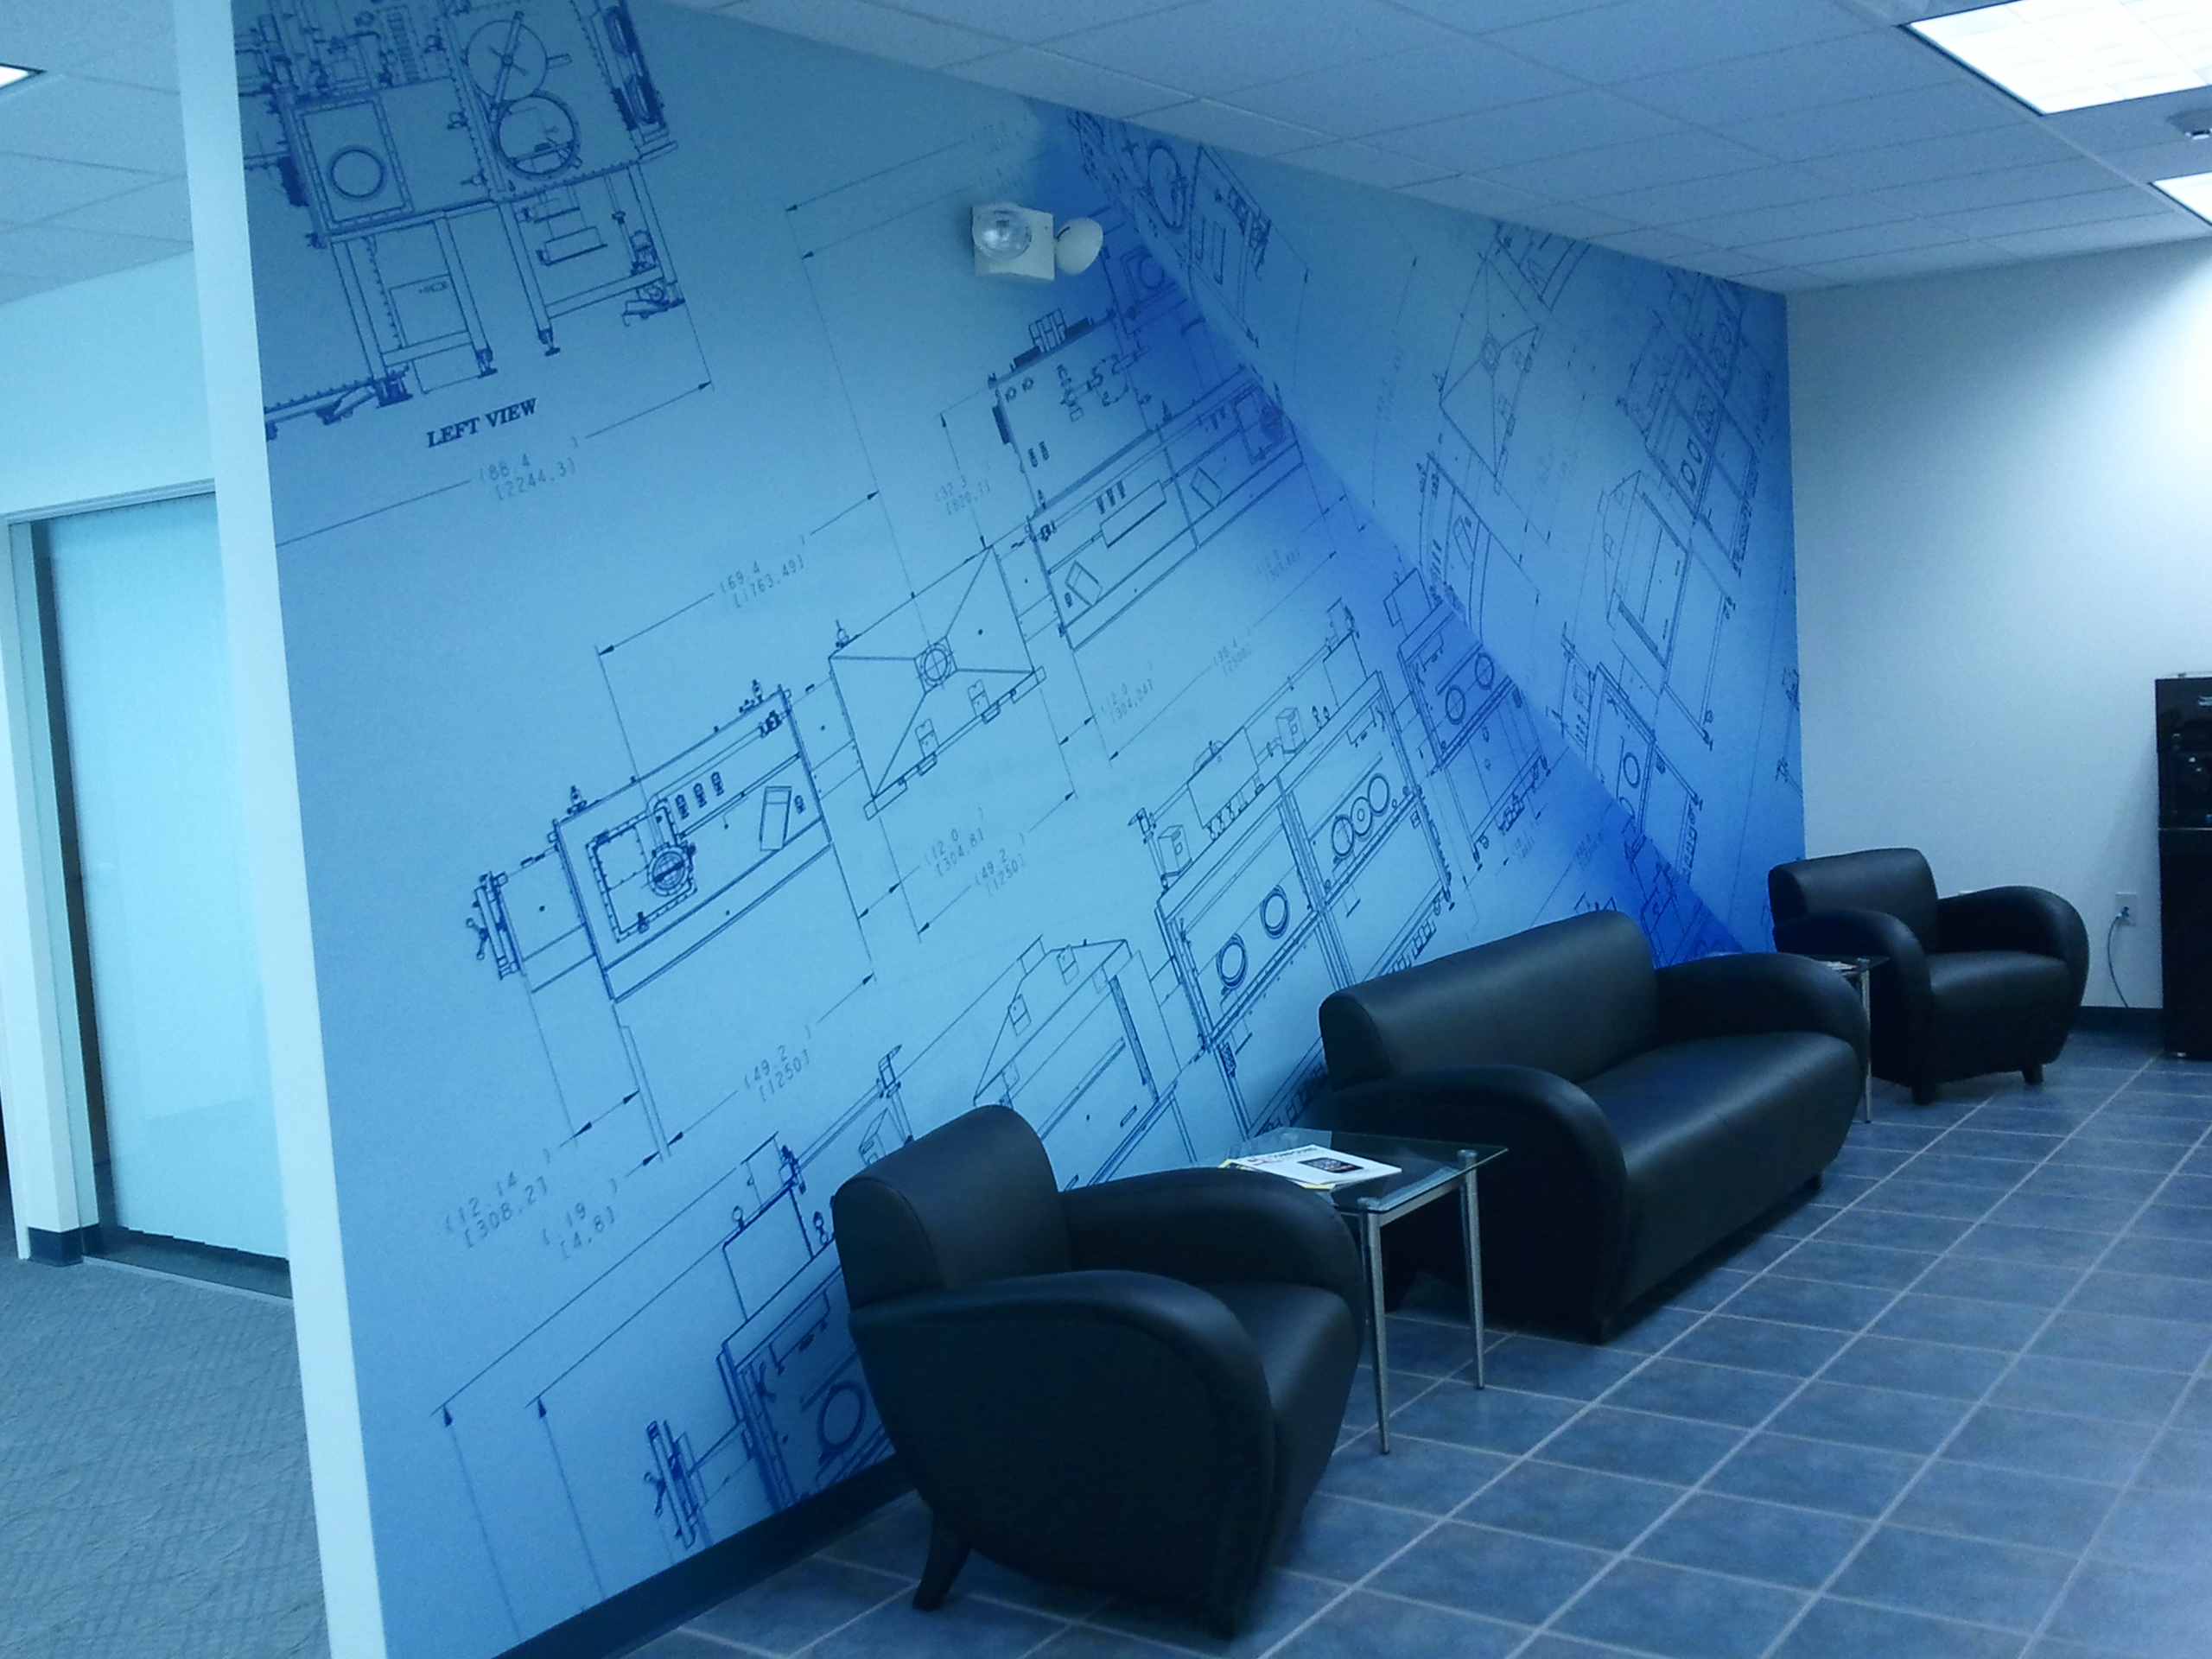 Custom Wall graphics for mbraun in stratham nh by Lake graphics berwick maine